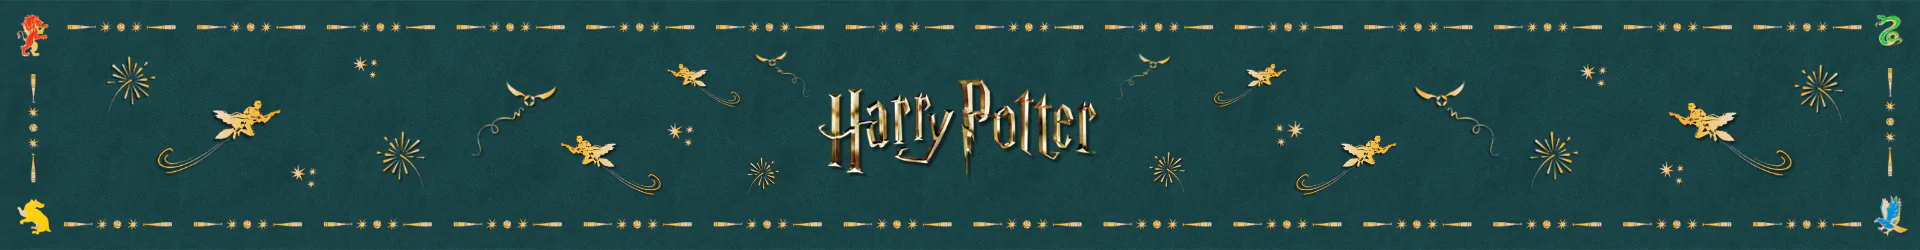 Harry Potter puzzles banner